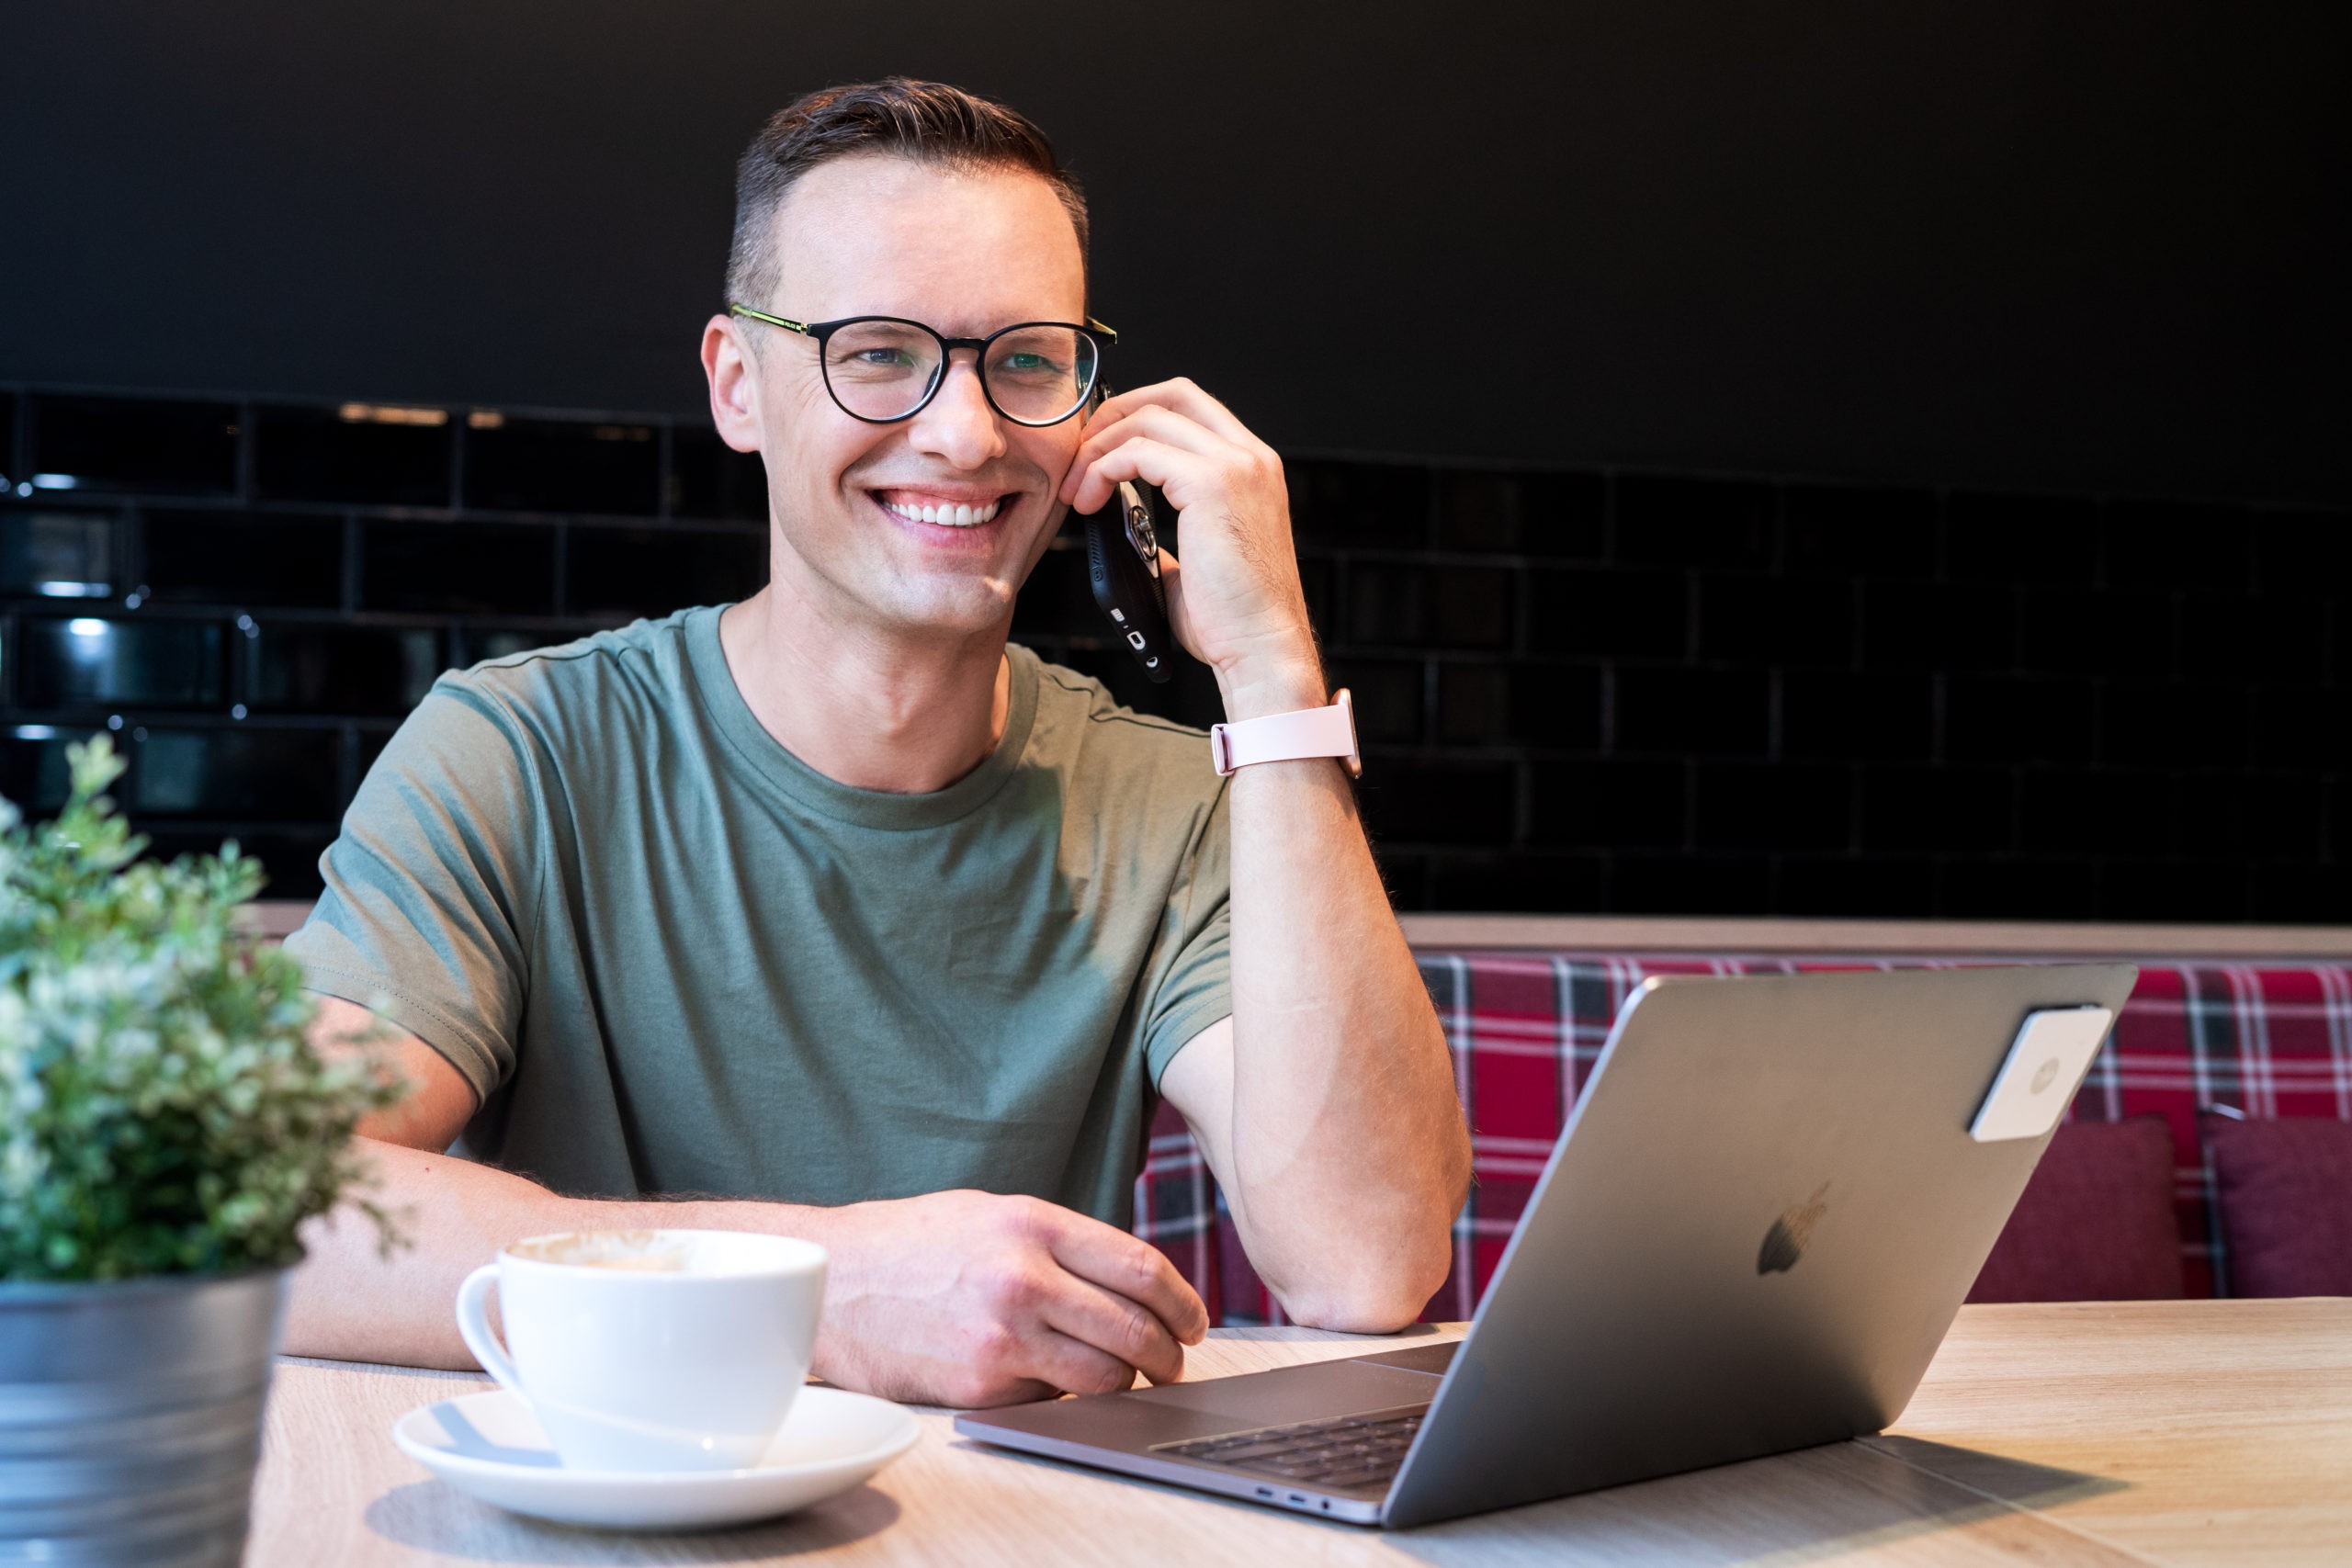 Man's face calling to talk about business intelligence